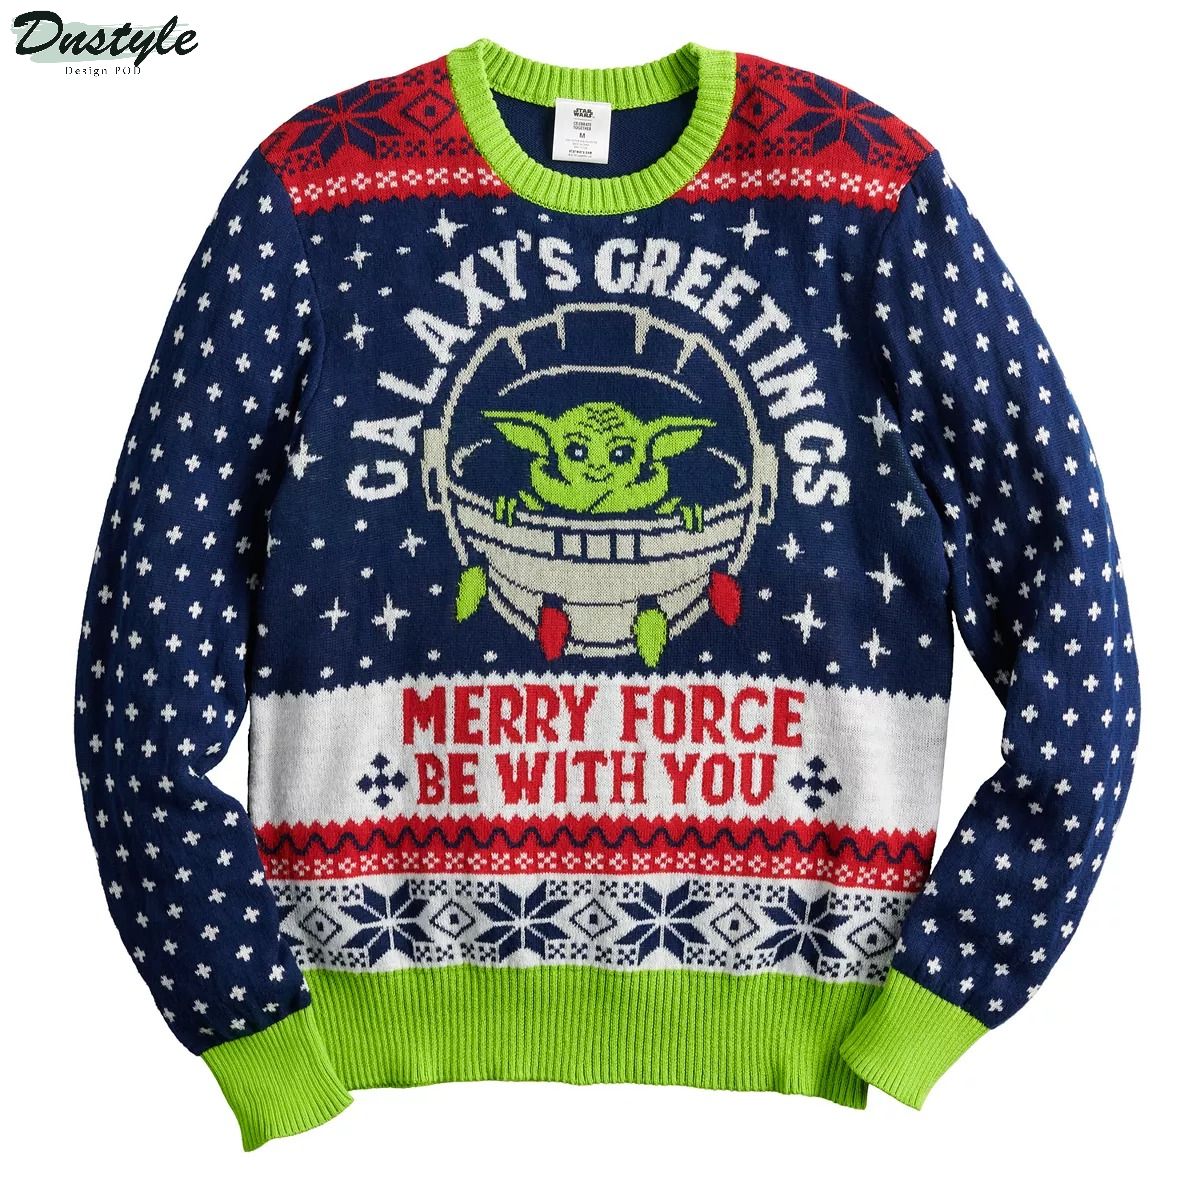 Star Wars The Mandalorian galaxys greetings merry force be with you ugly christmas sweater 1